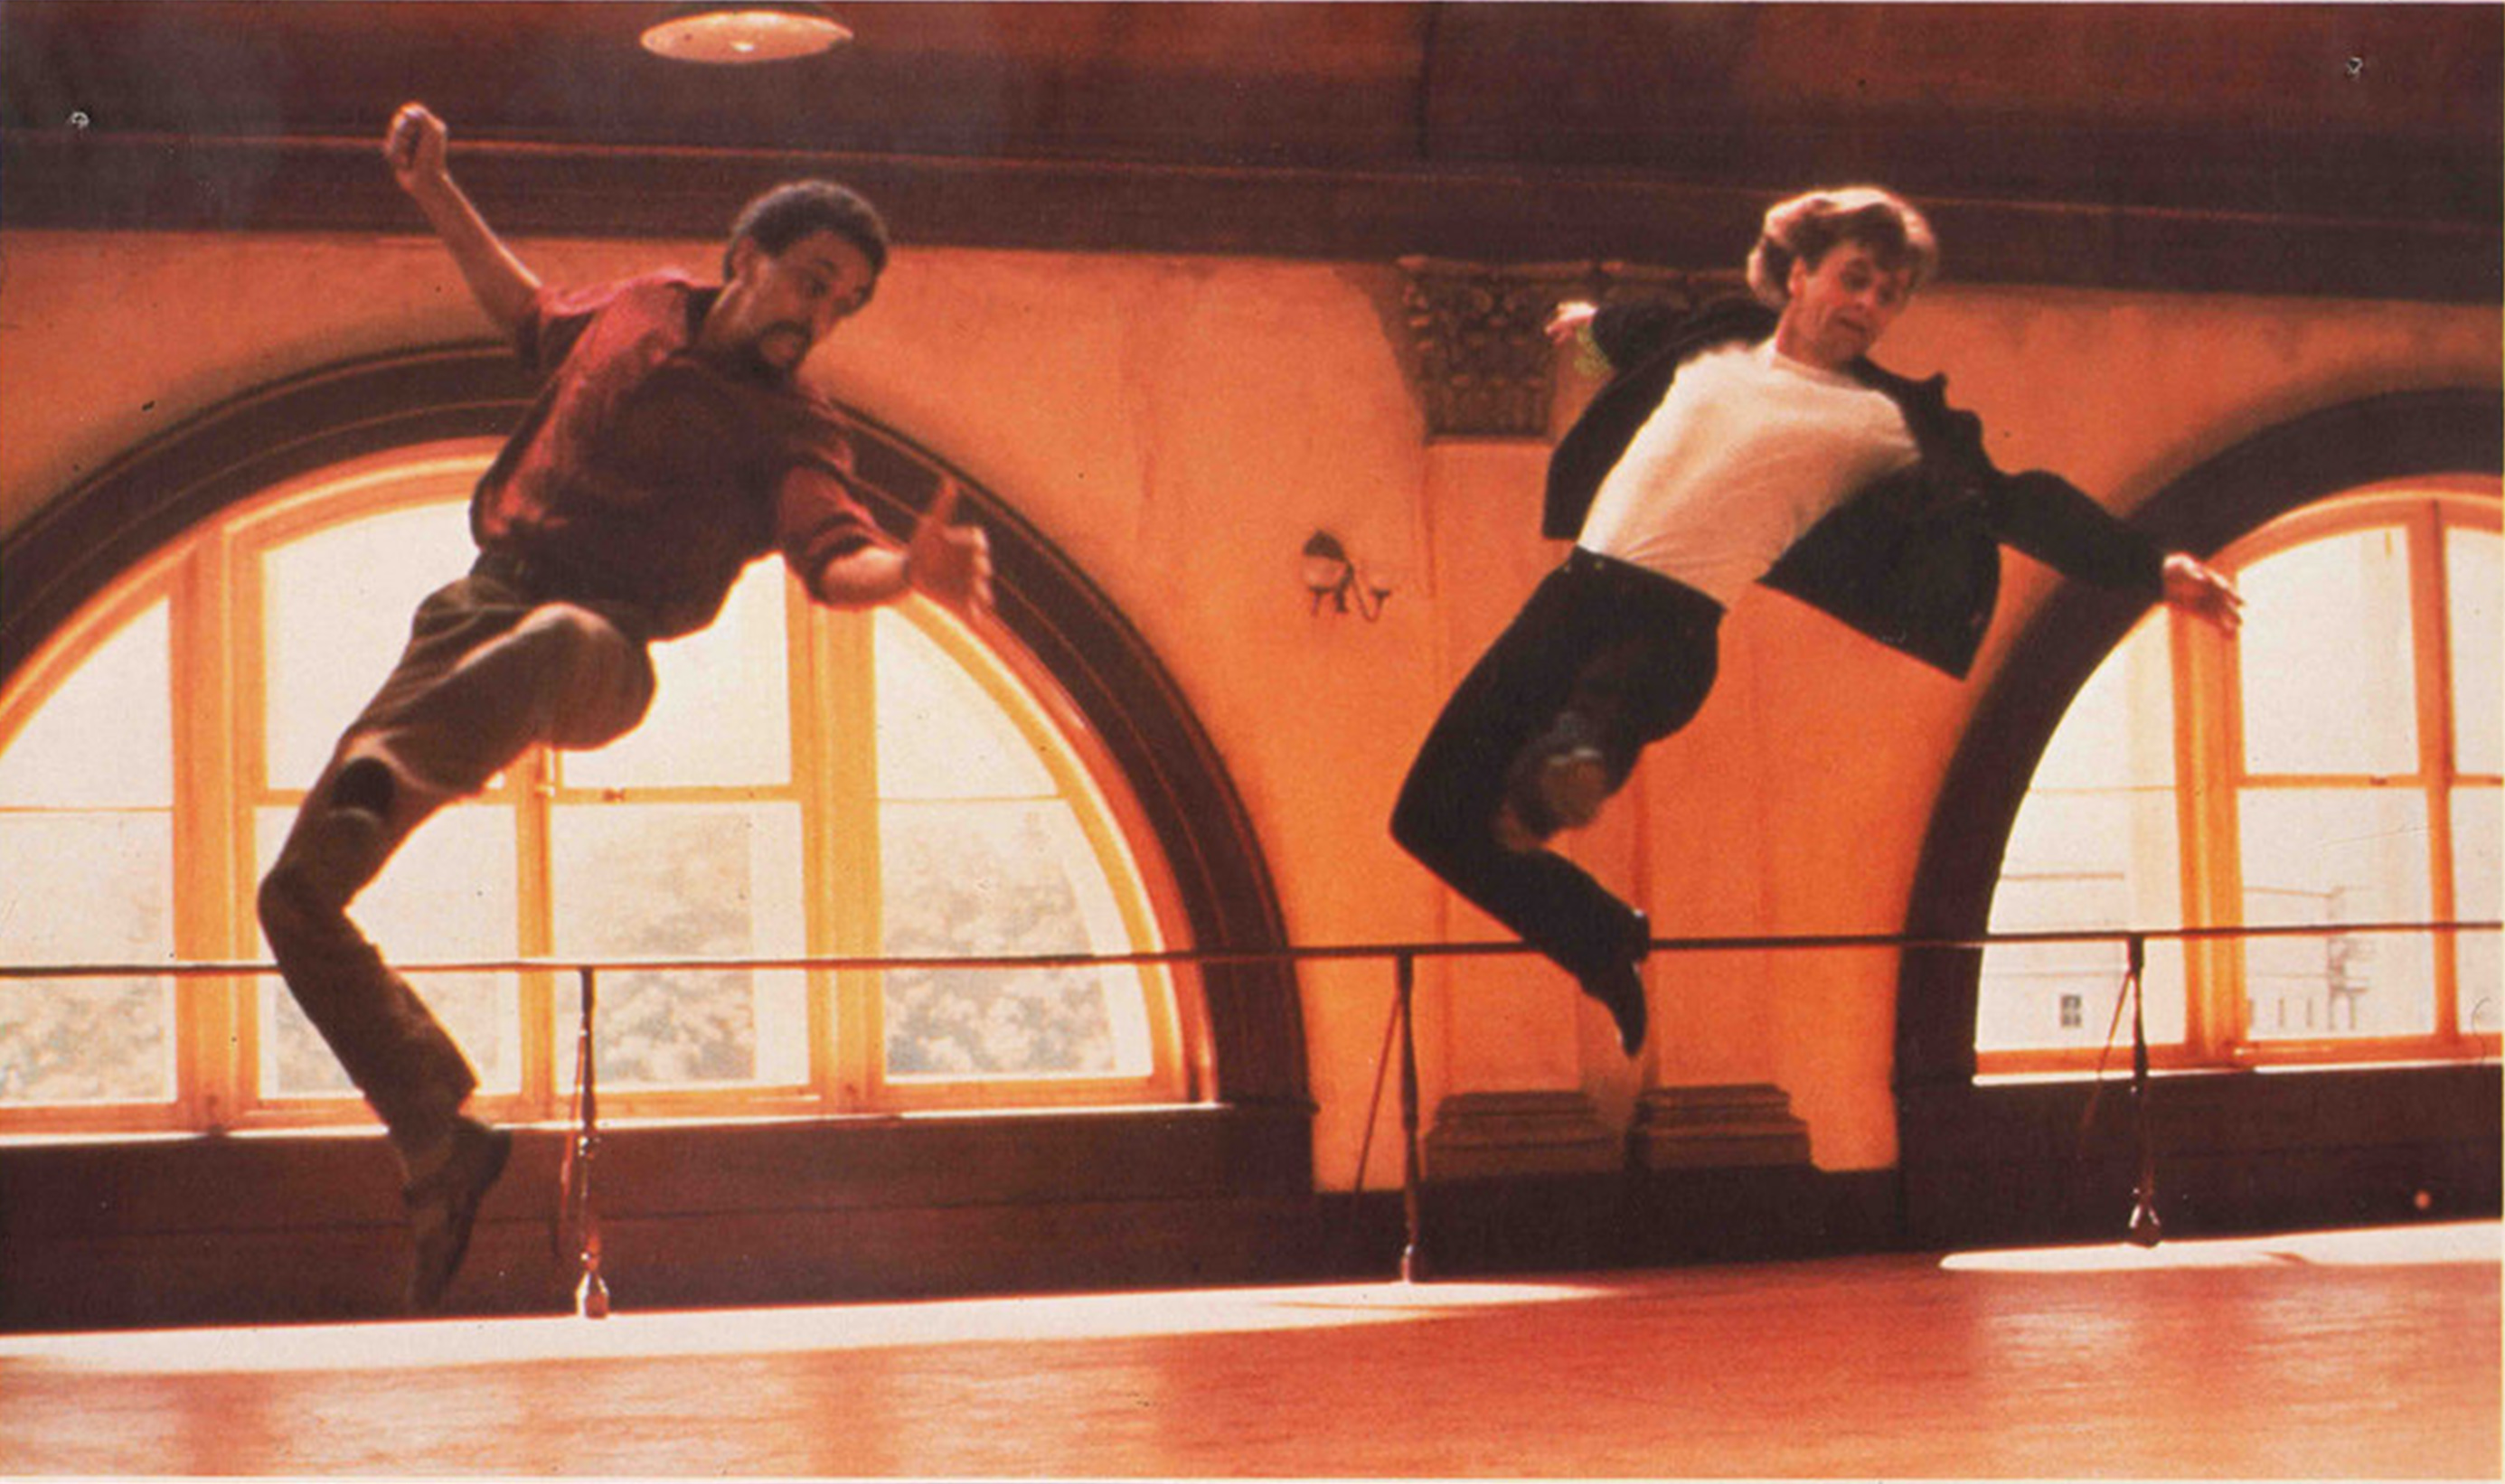 Two dance legends in one movie – Mikhail Baryshnikov and Gregory Hines shared the stage in White Nights while a third legend, Twyla Tharp, choreographed the dance sequences. White Nights publicity photo from Columbia Pictures